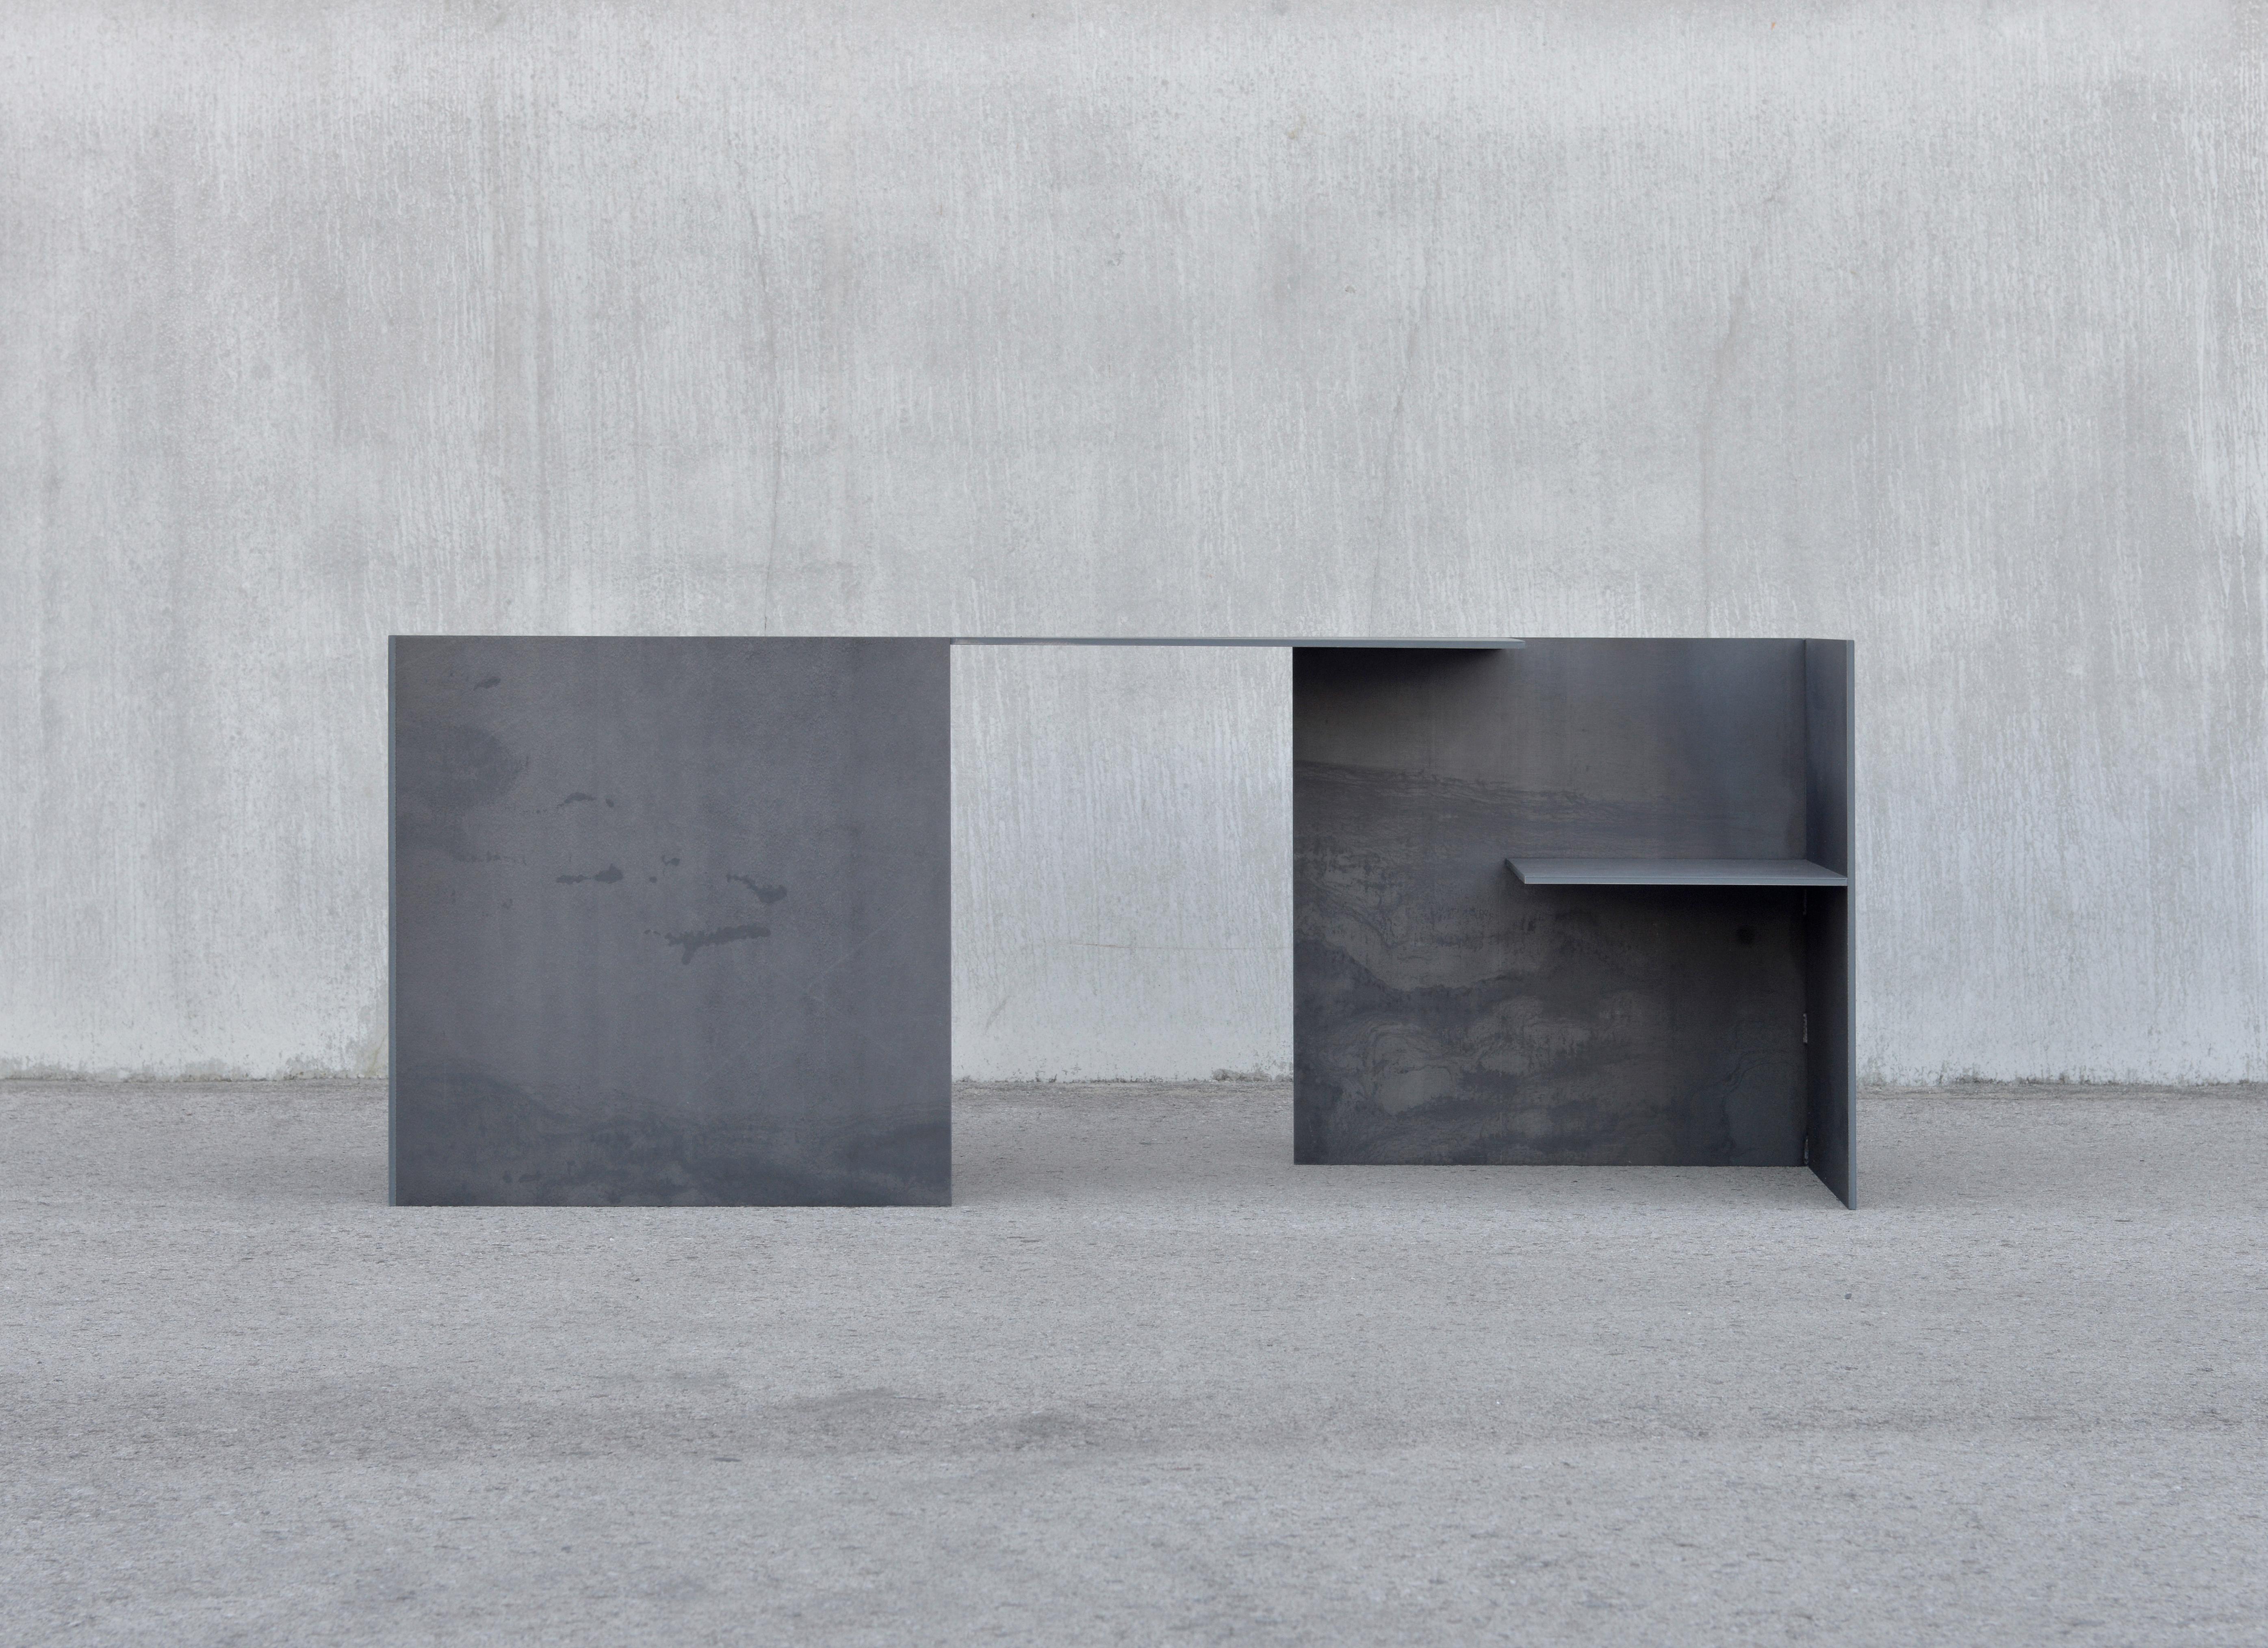 The MSB double desk 302.2 is a work comprised of 7 pieces of 10mm oxidized steel plates. A study in constructive essentialism and materialization, the designer stands in front of the assembly of large steel slats, sifting through the options with